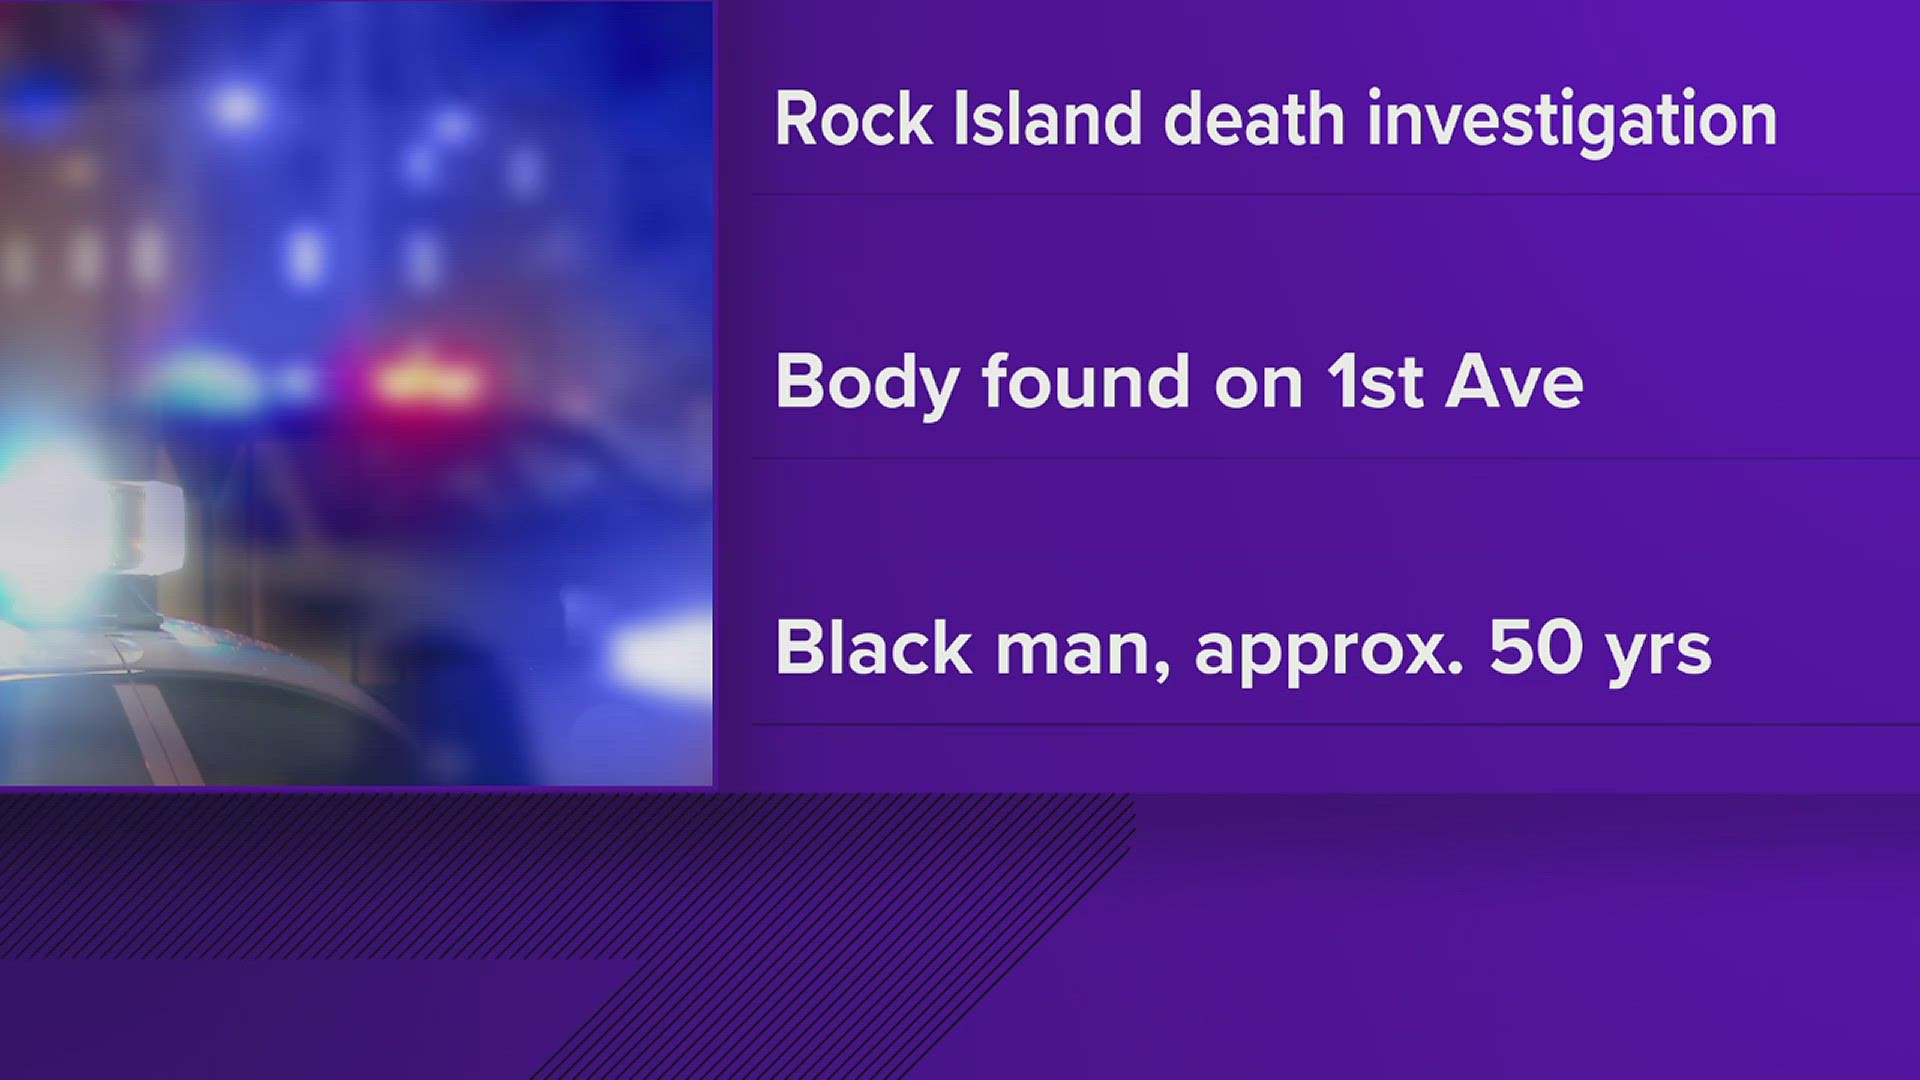 Those with information related to this case are encouraged to call the Rock Island Police Department at 309-732-2677 or CrimeStoppers at 309-762-9500.